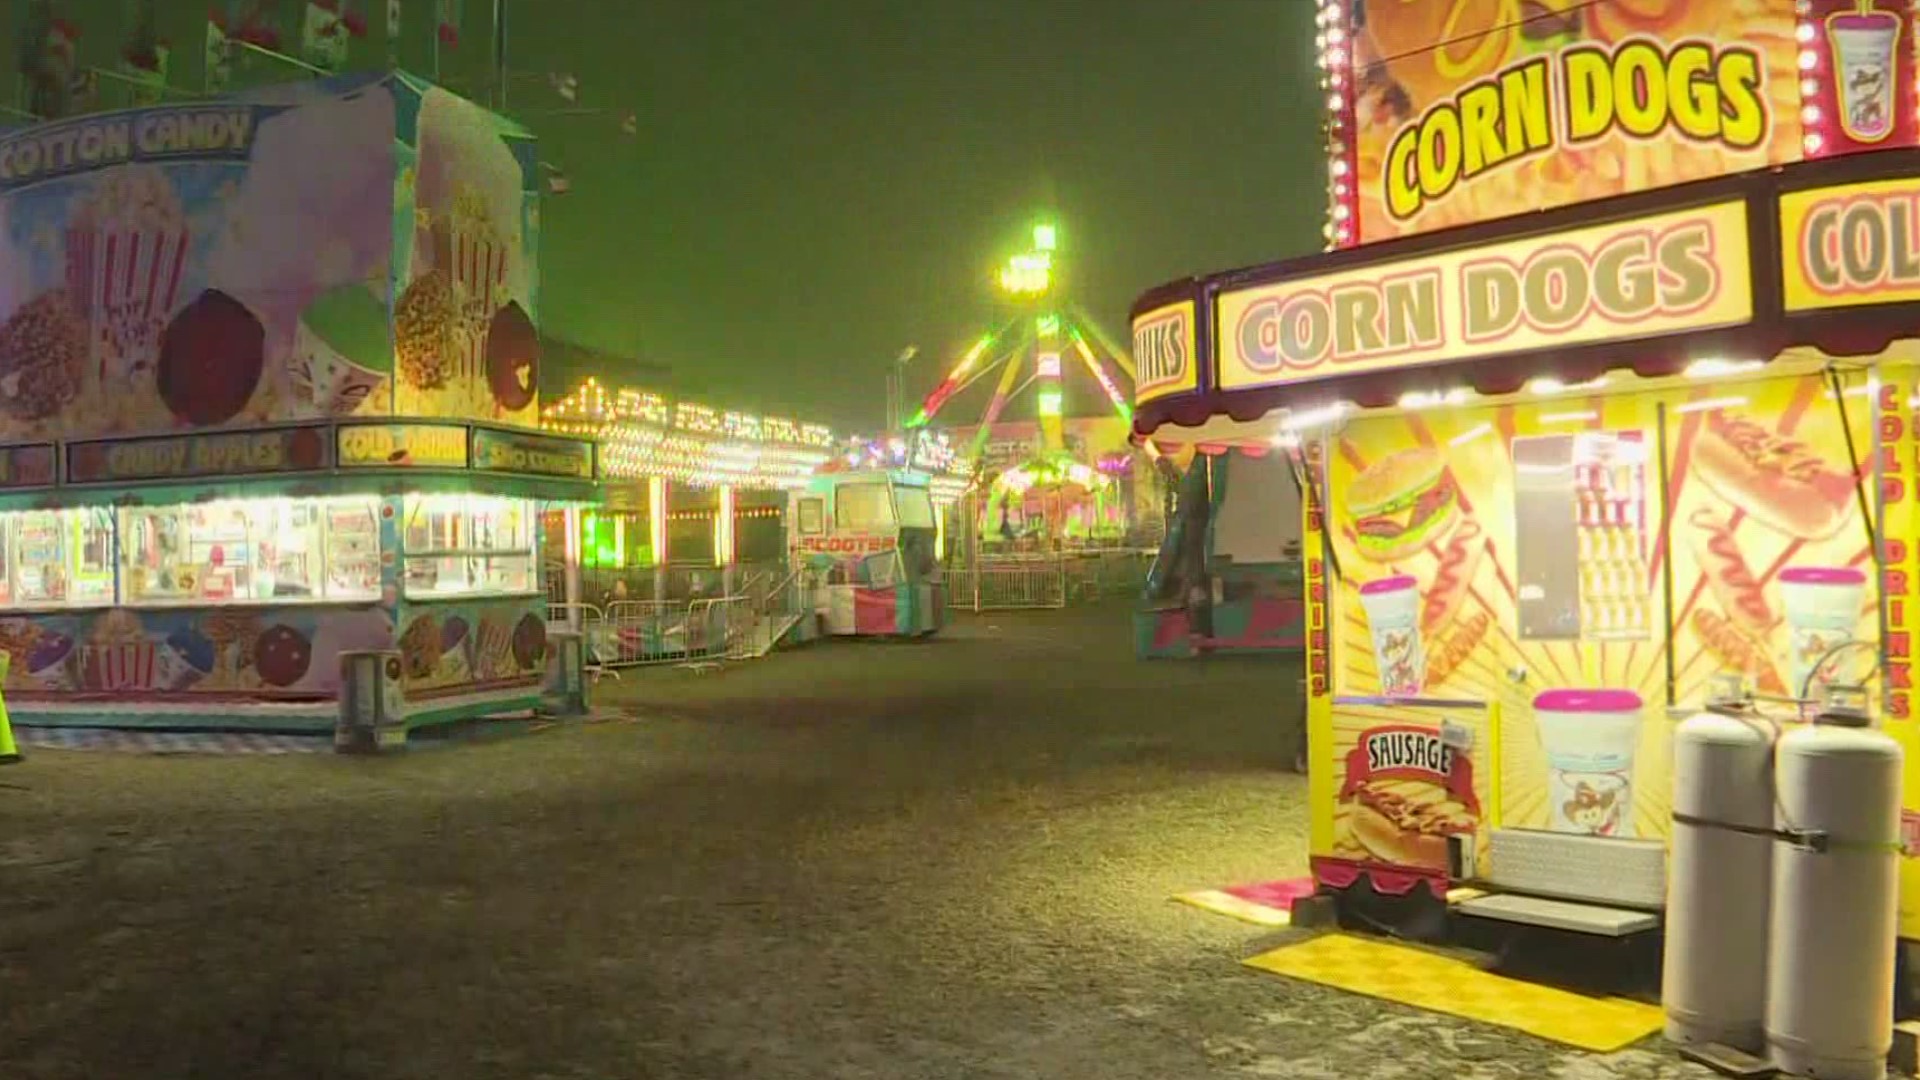 Whether it's the smell of cotton candy in the air or the carnival games you've been missing, don't worry, the 74th Annual Pasco County Fair has it all.